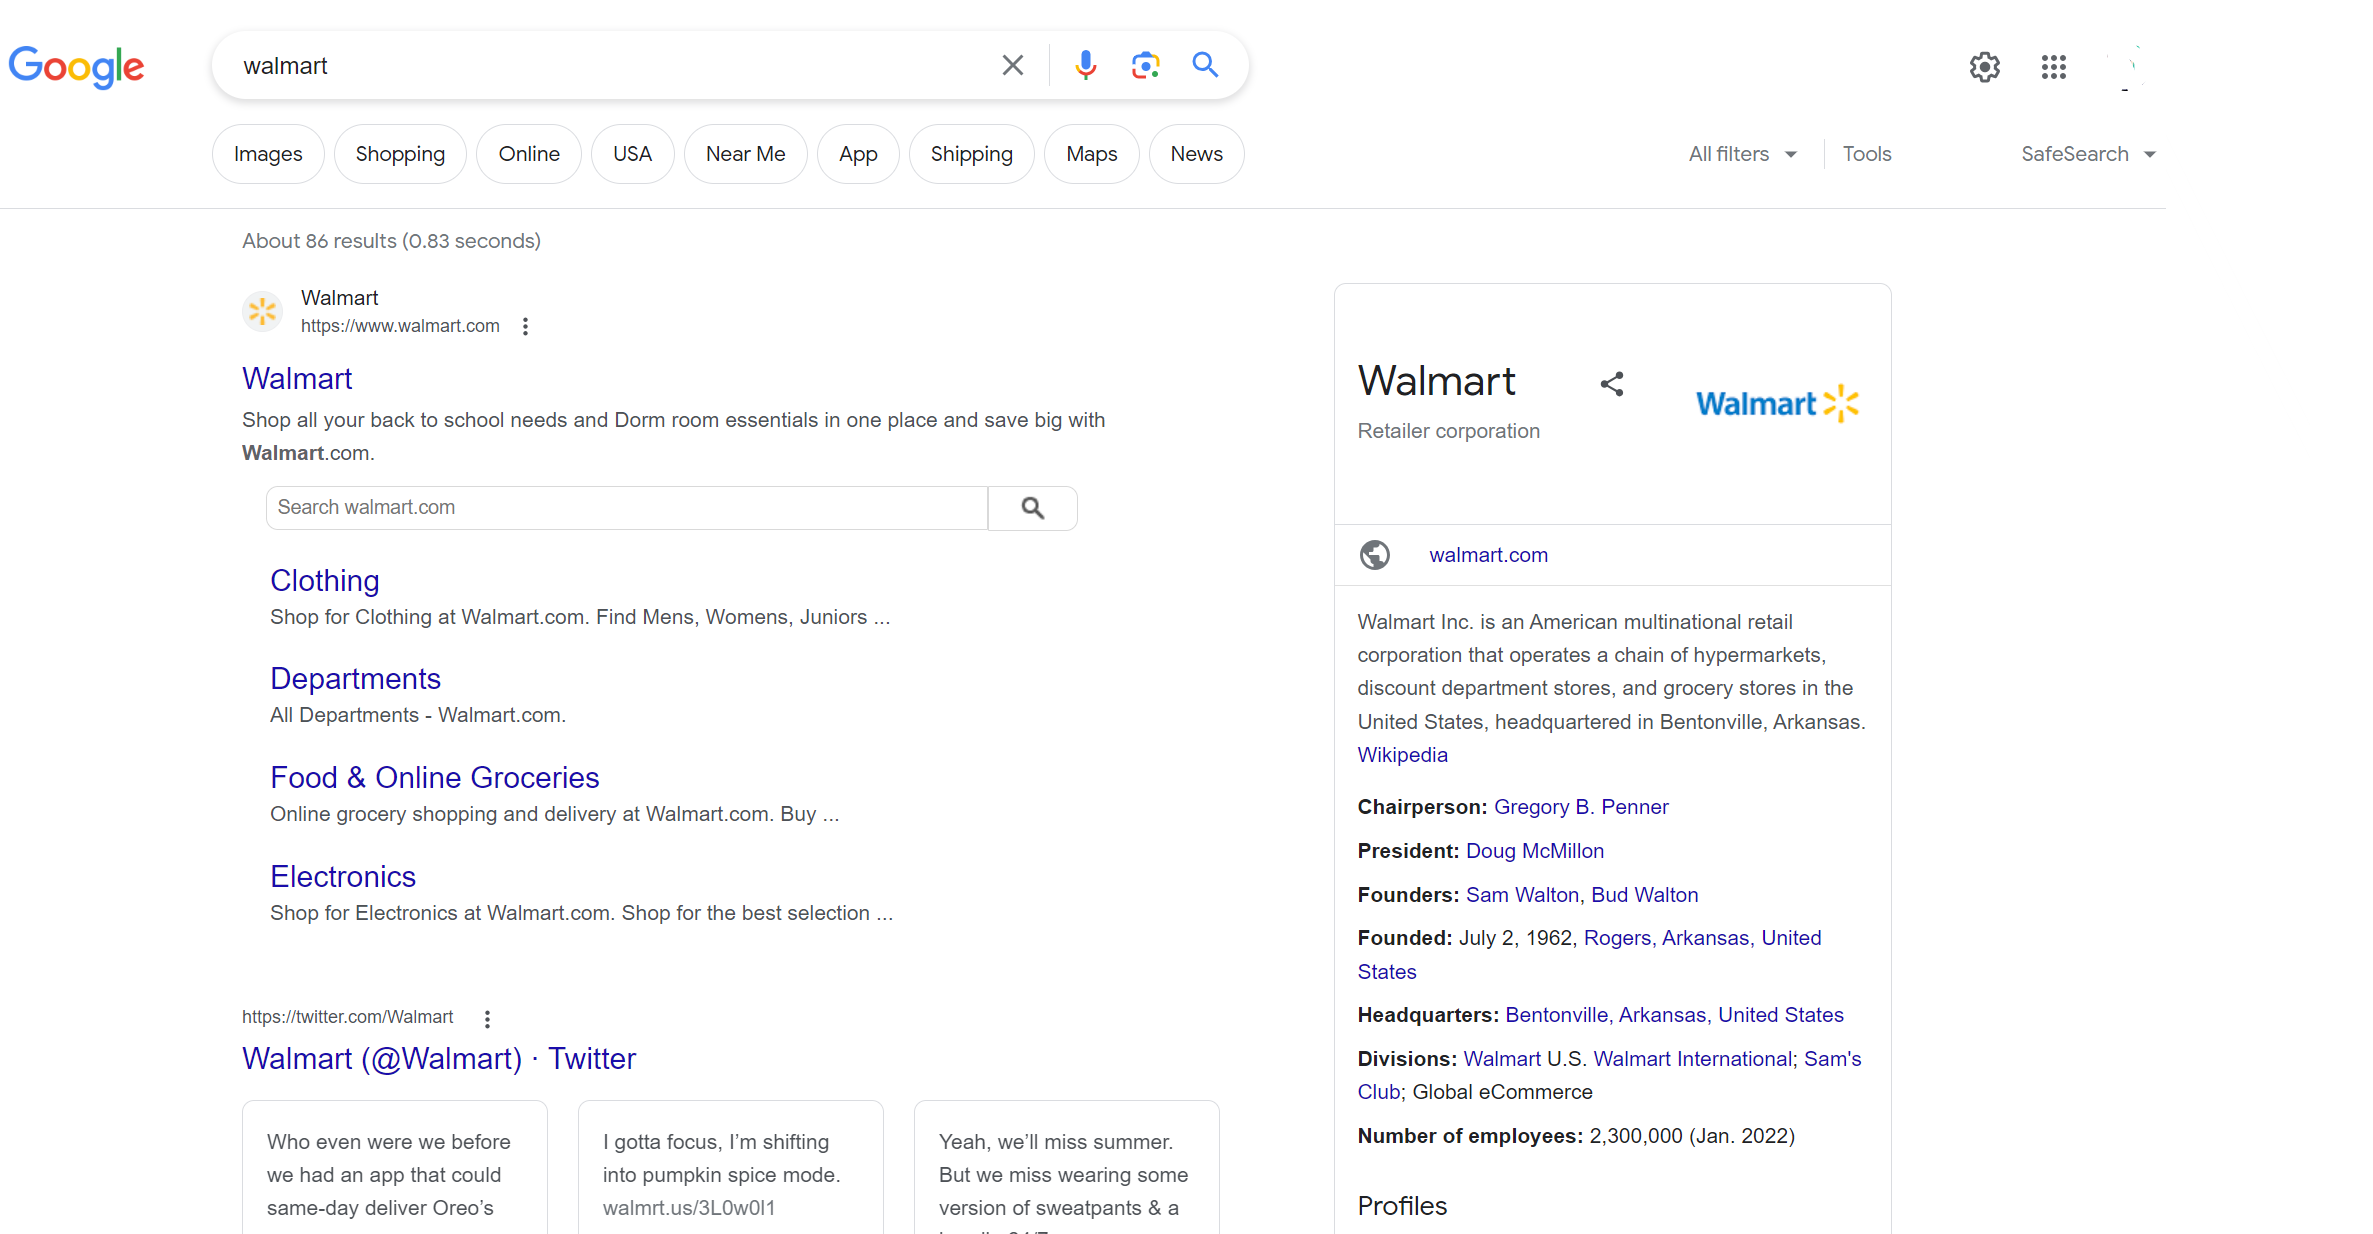 Examples of Structured Content: Walmart query search results.